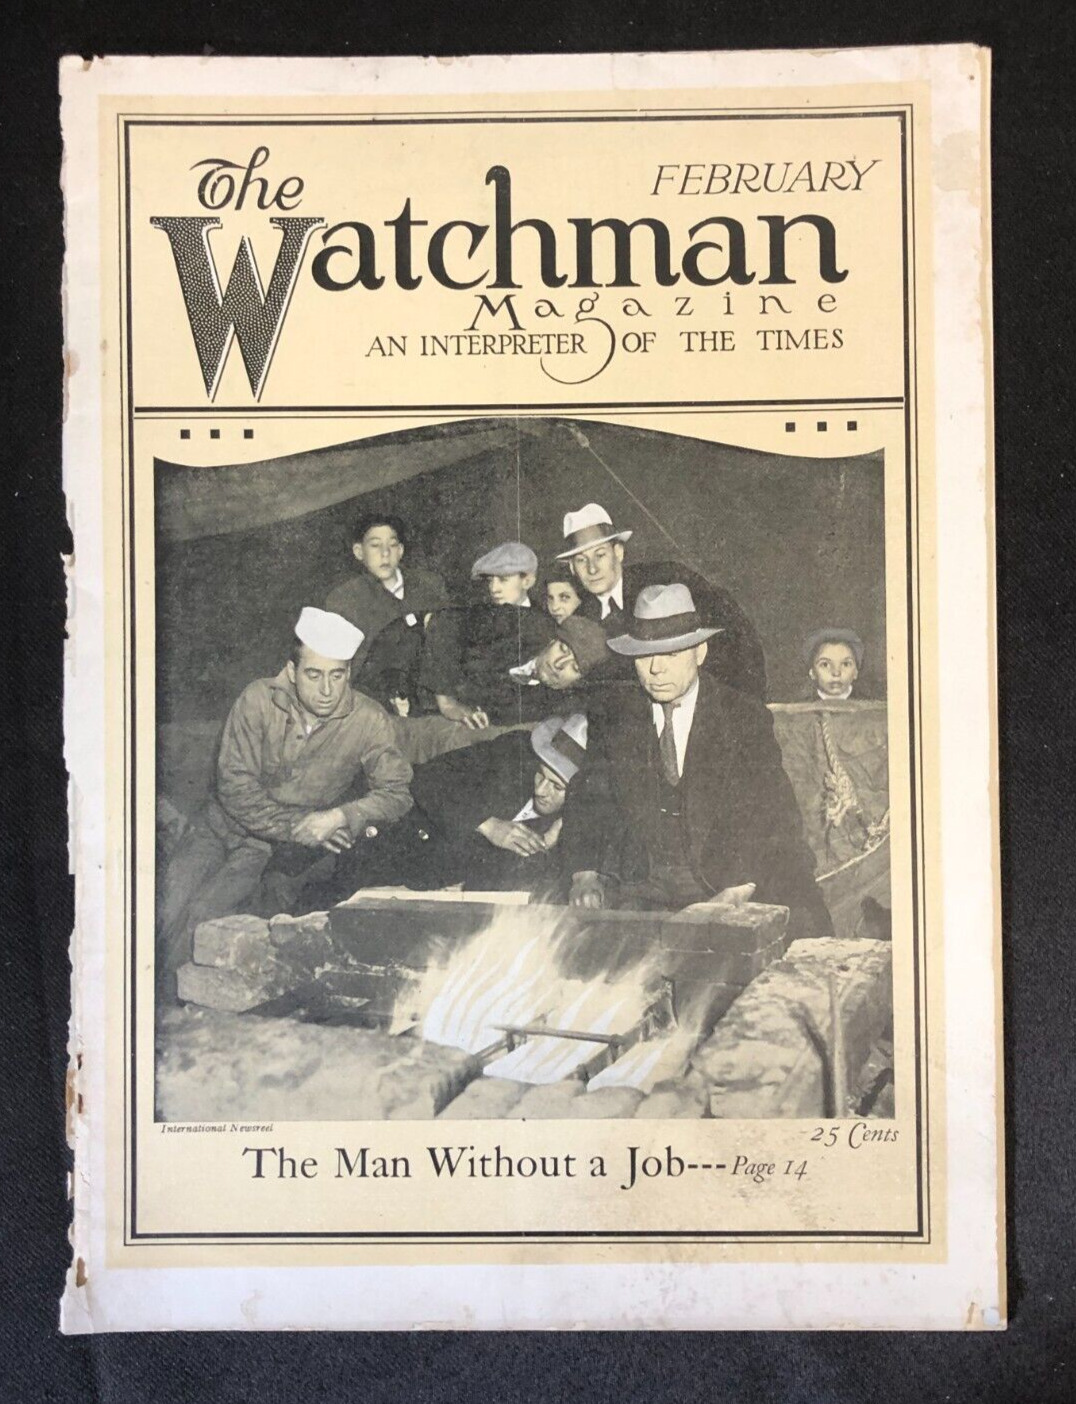 Vintage February 1931 The Watchman Magazine, Cover: The Man Without a Job